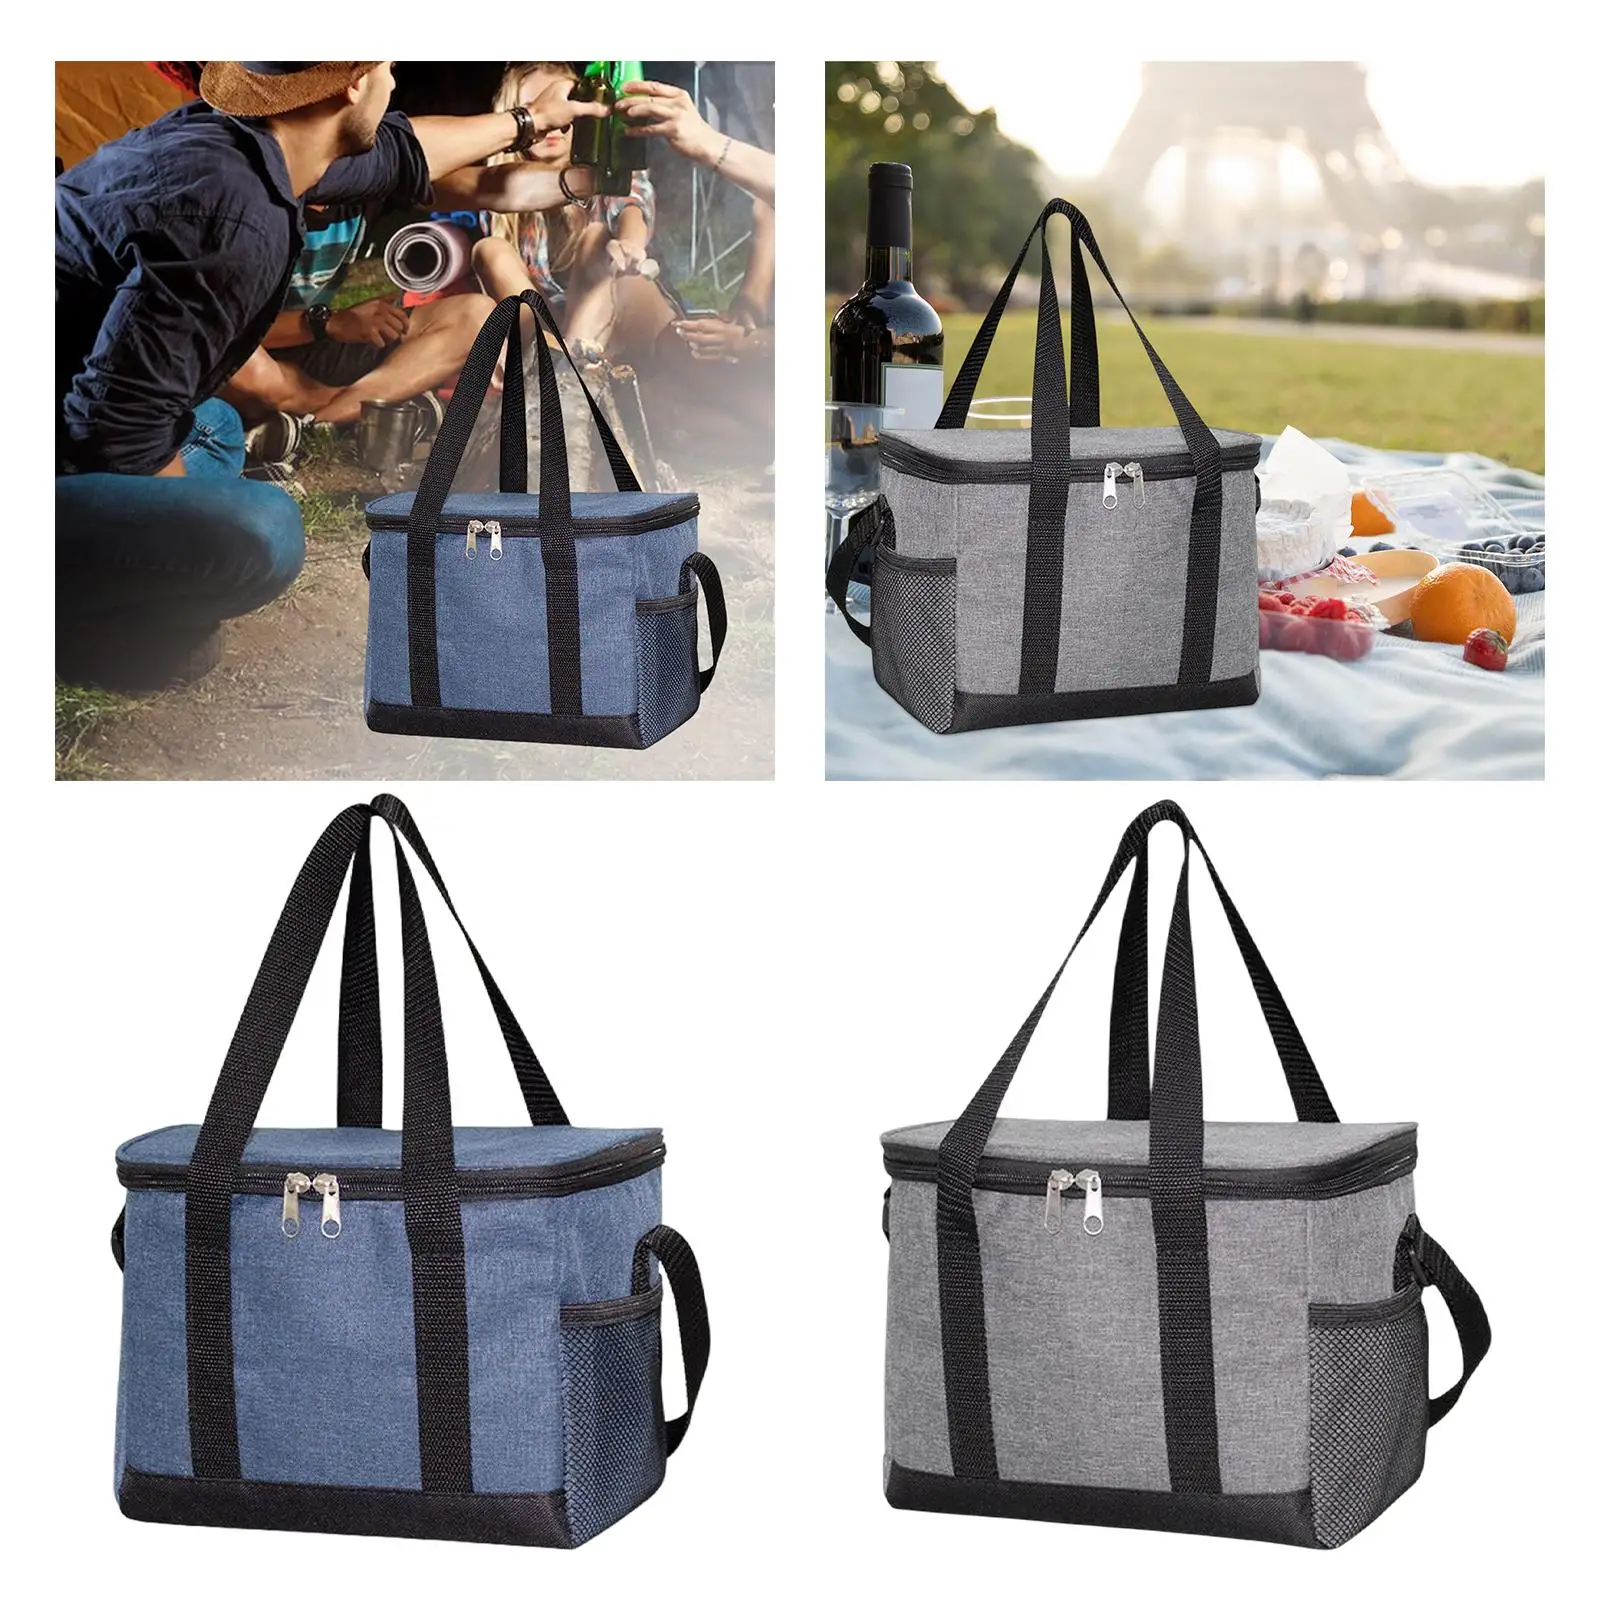 Insulated Lunch Shopping Bag Reusable Insulated Grocery Bag for Camping Car